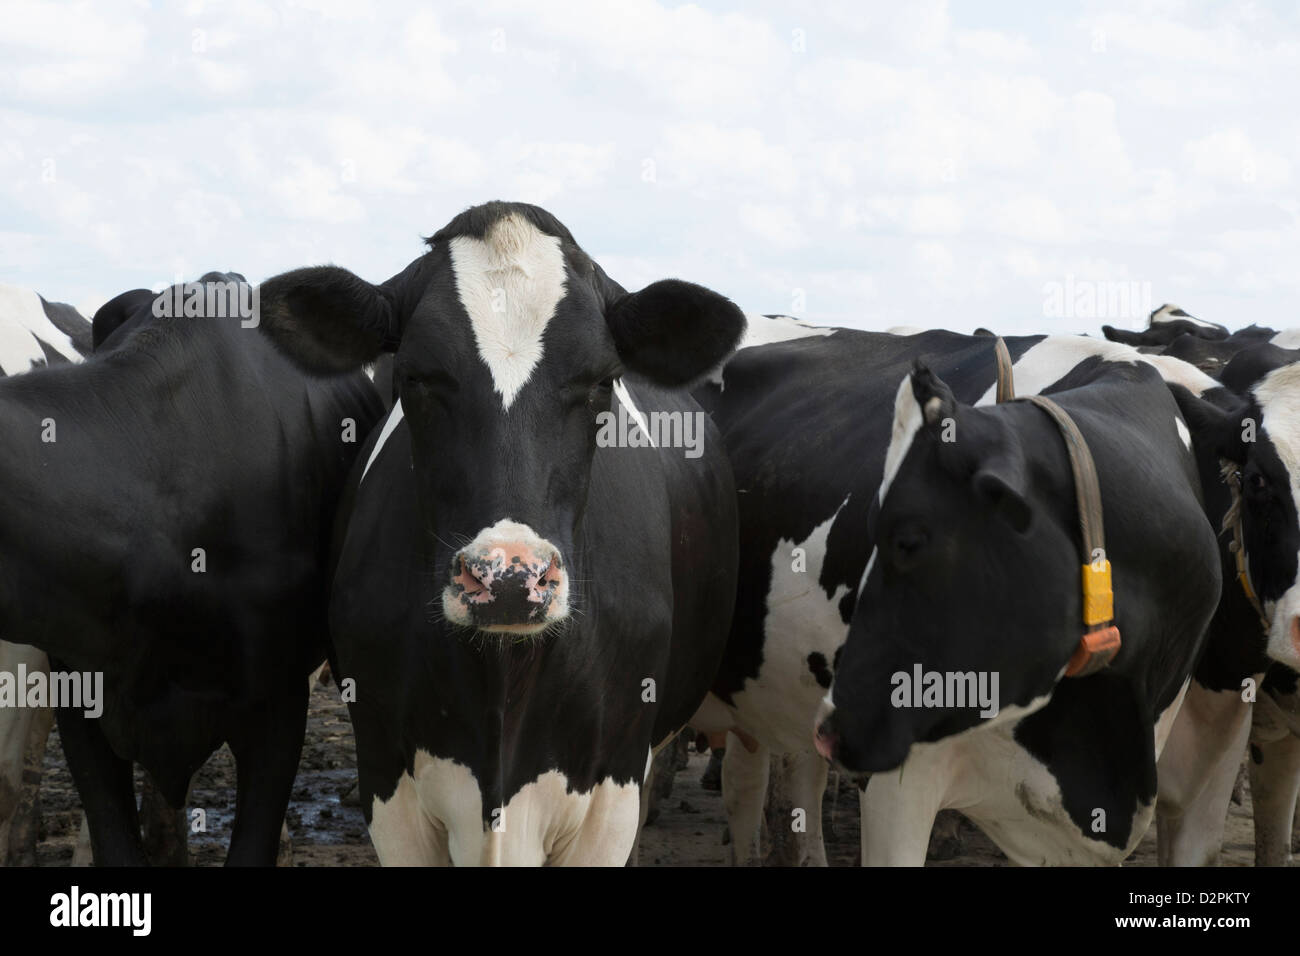 Les vaches avec tags Standing together Banque D'Images